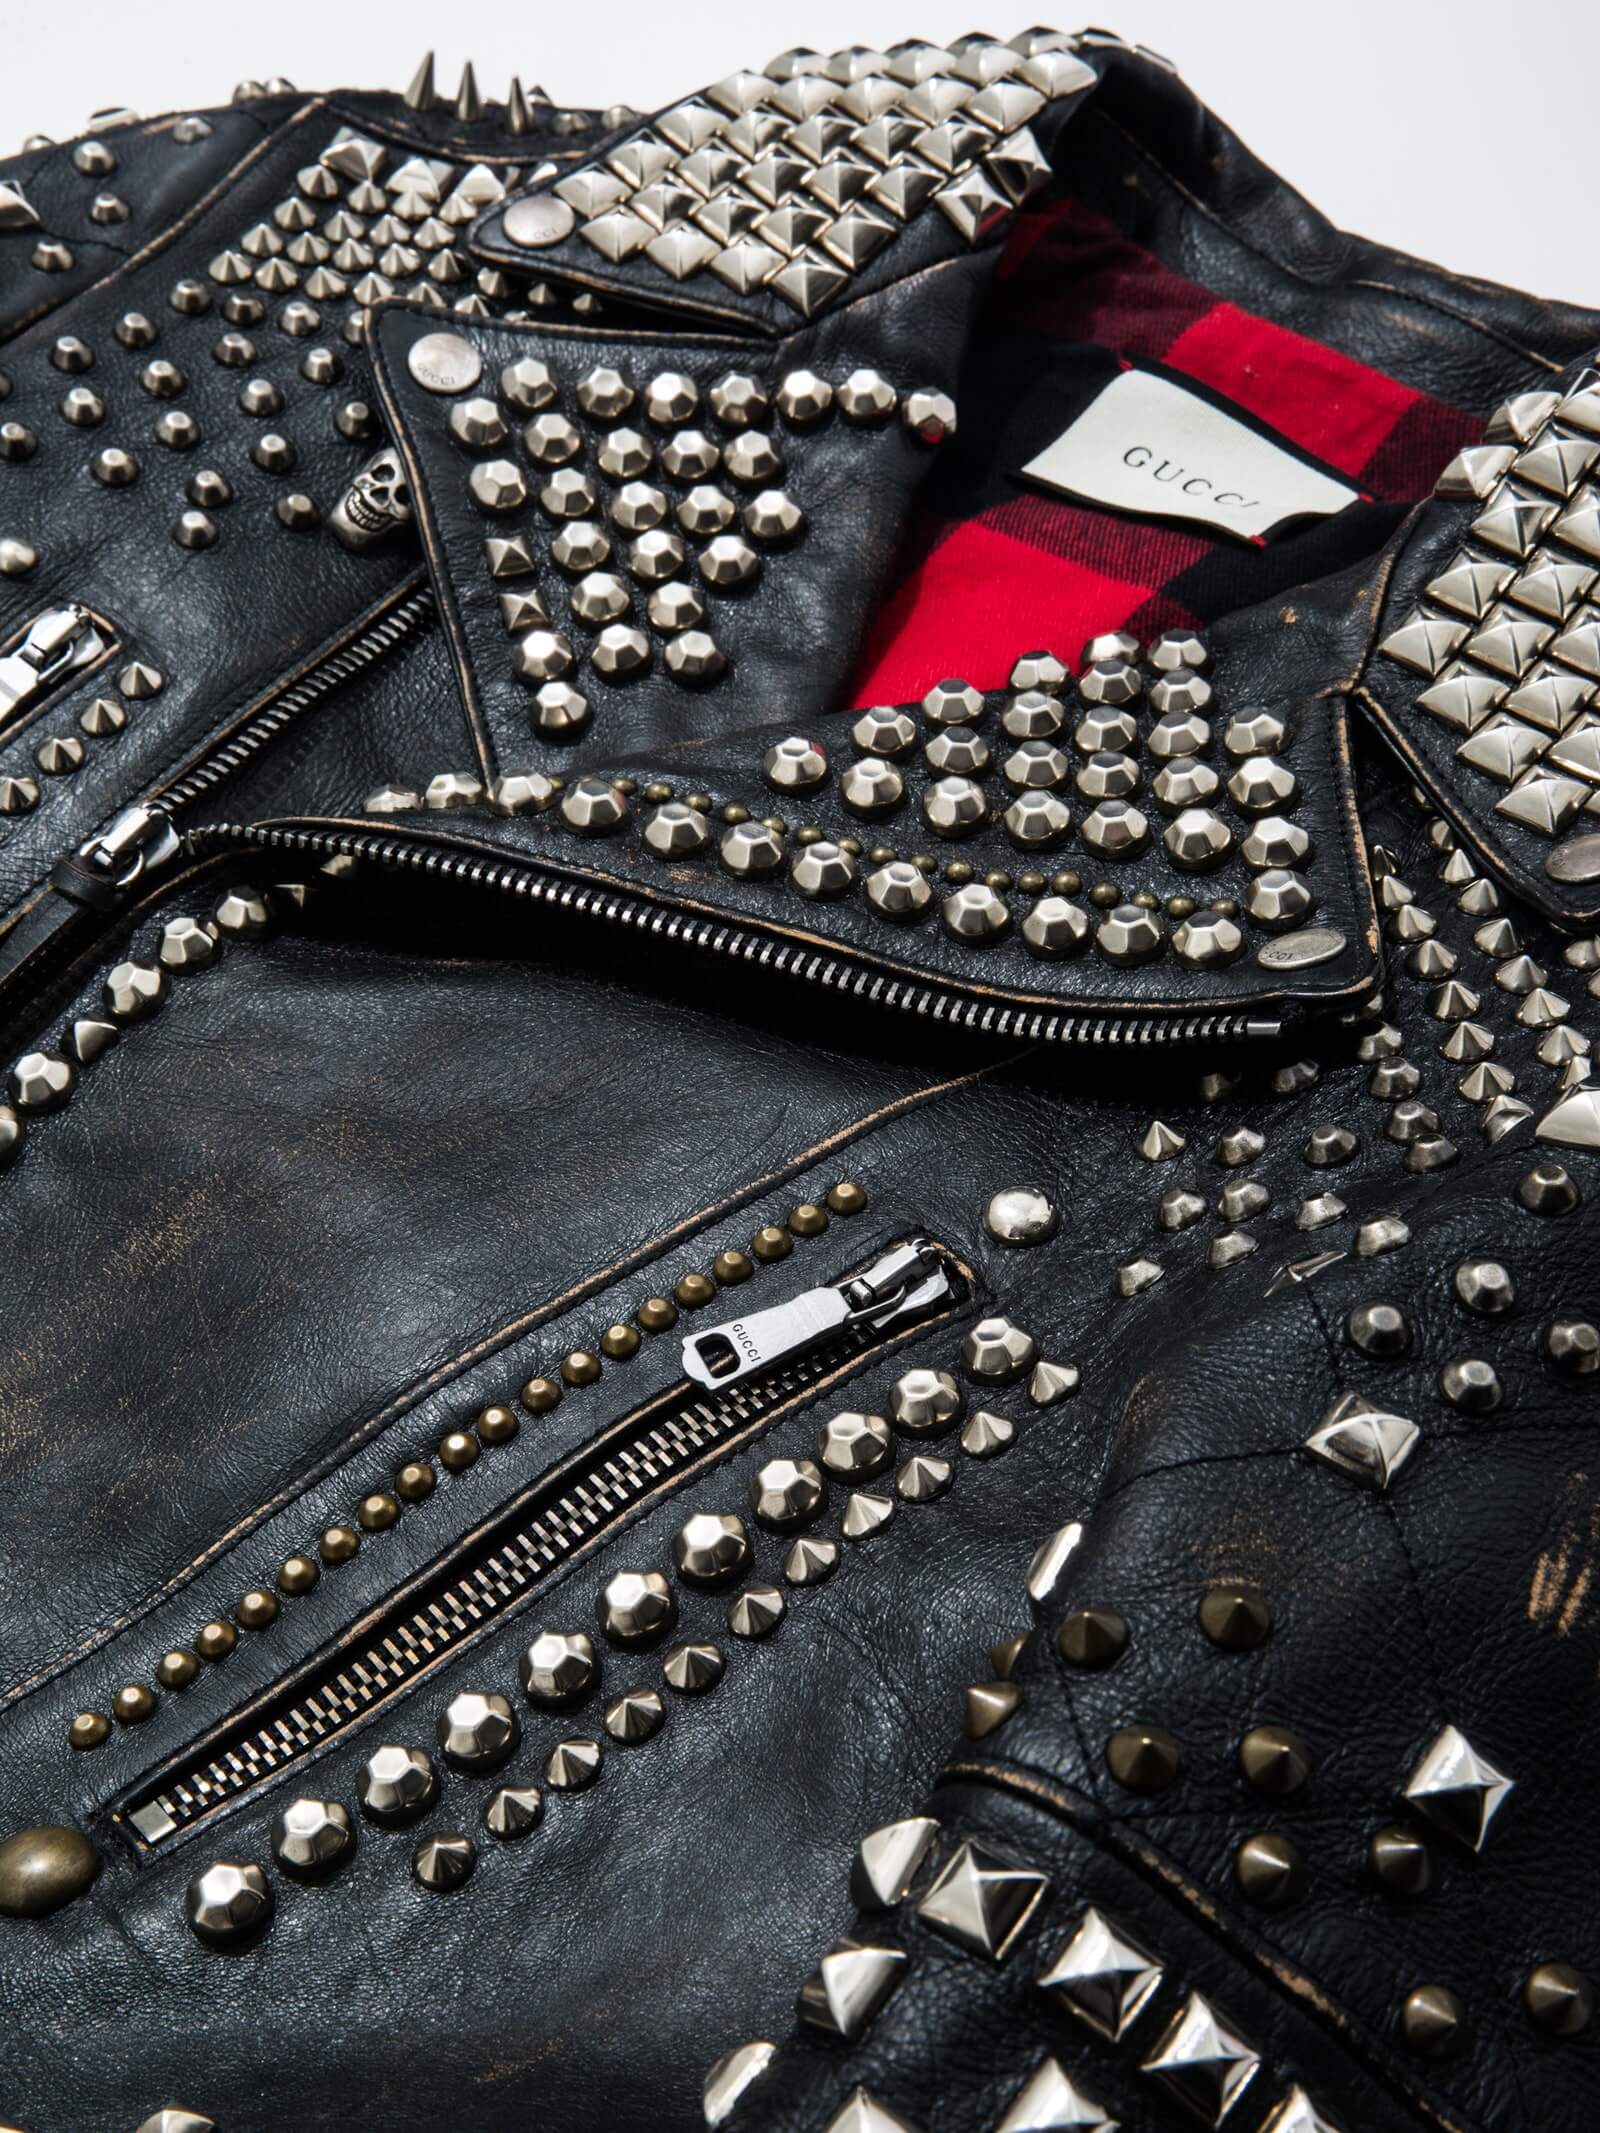 Why are Leather Jackets so Expensive?